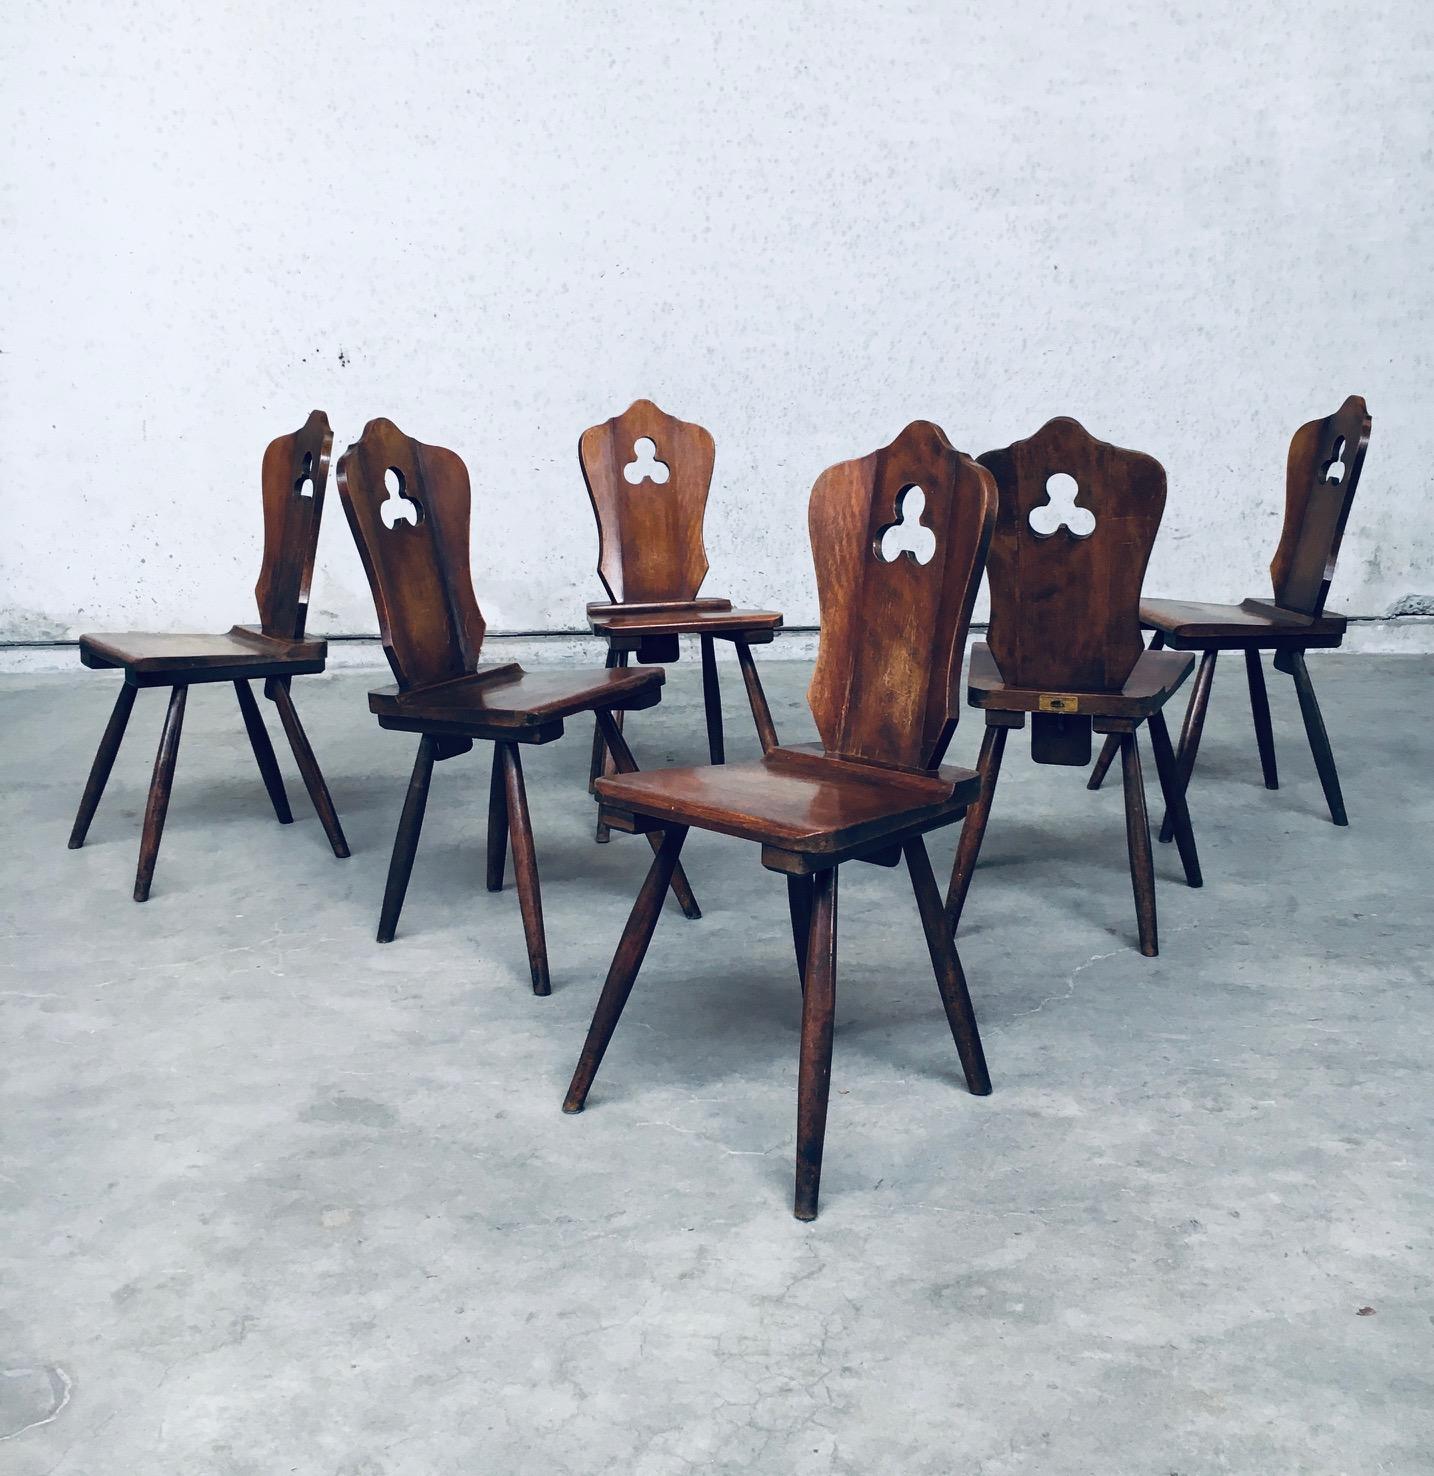 Belgian Brutalist Design Dining Chair Set by Lux-Wood, Belgium, 1960's For Sale